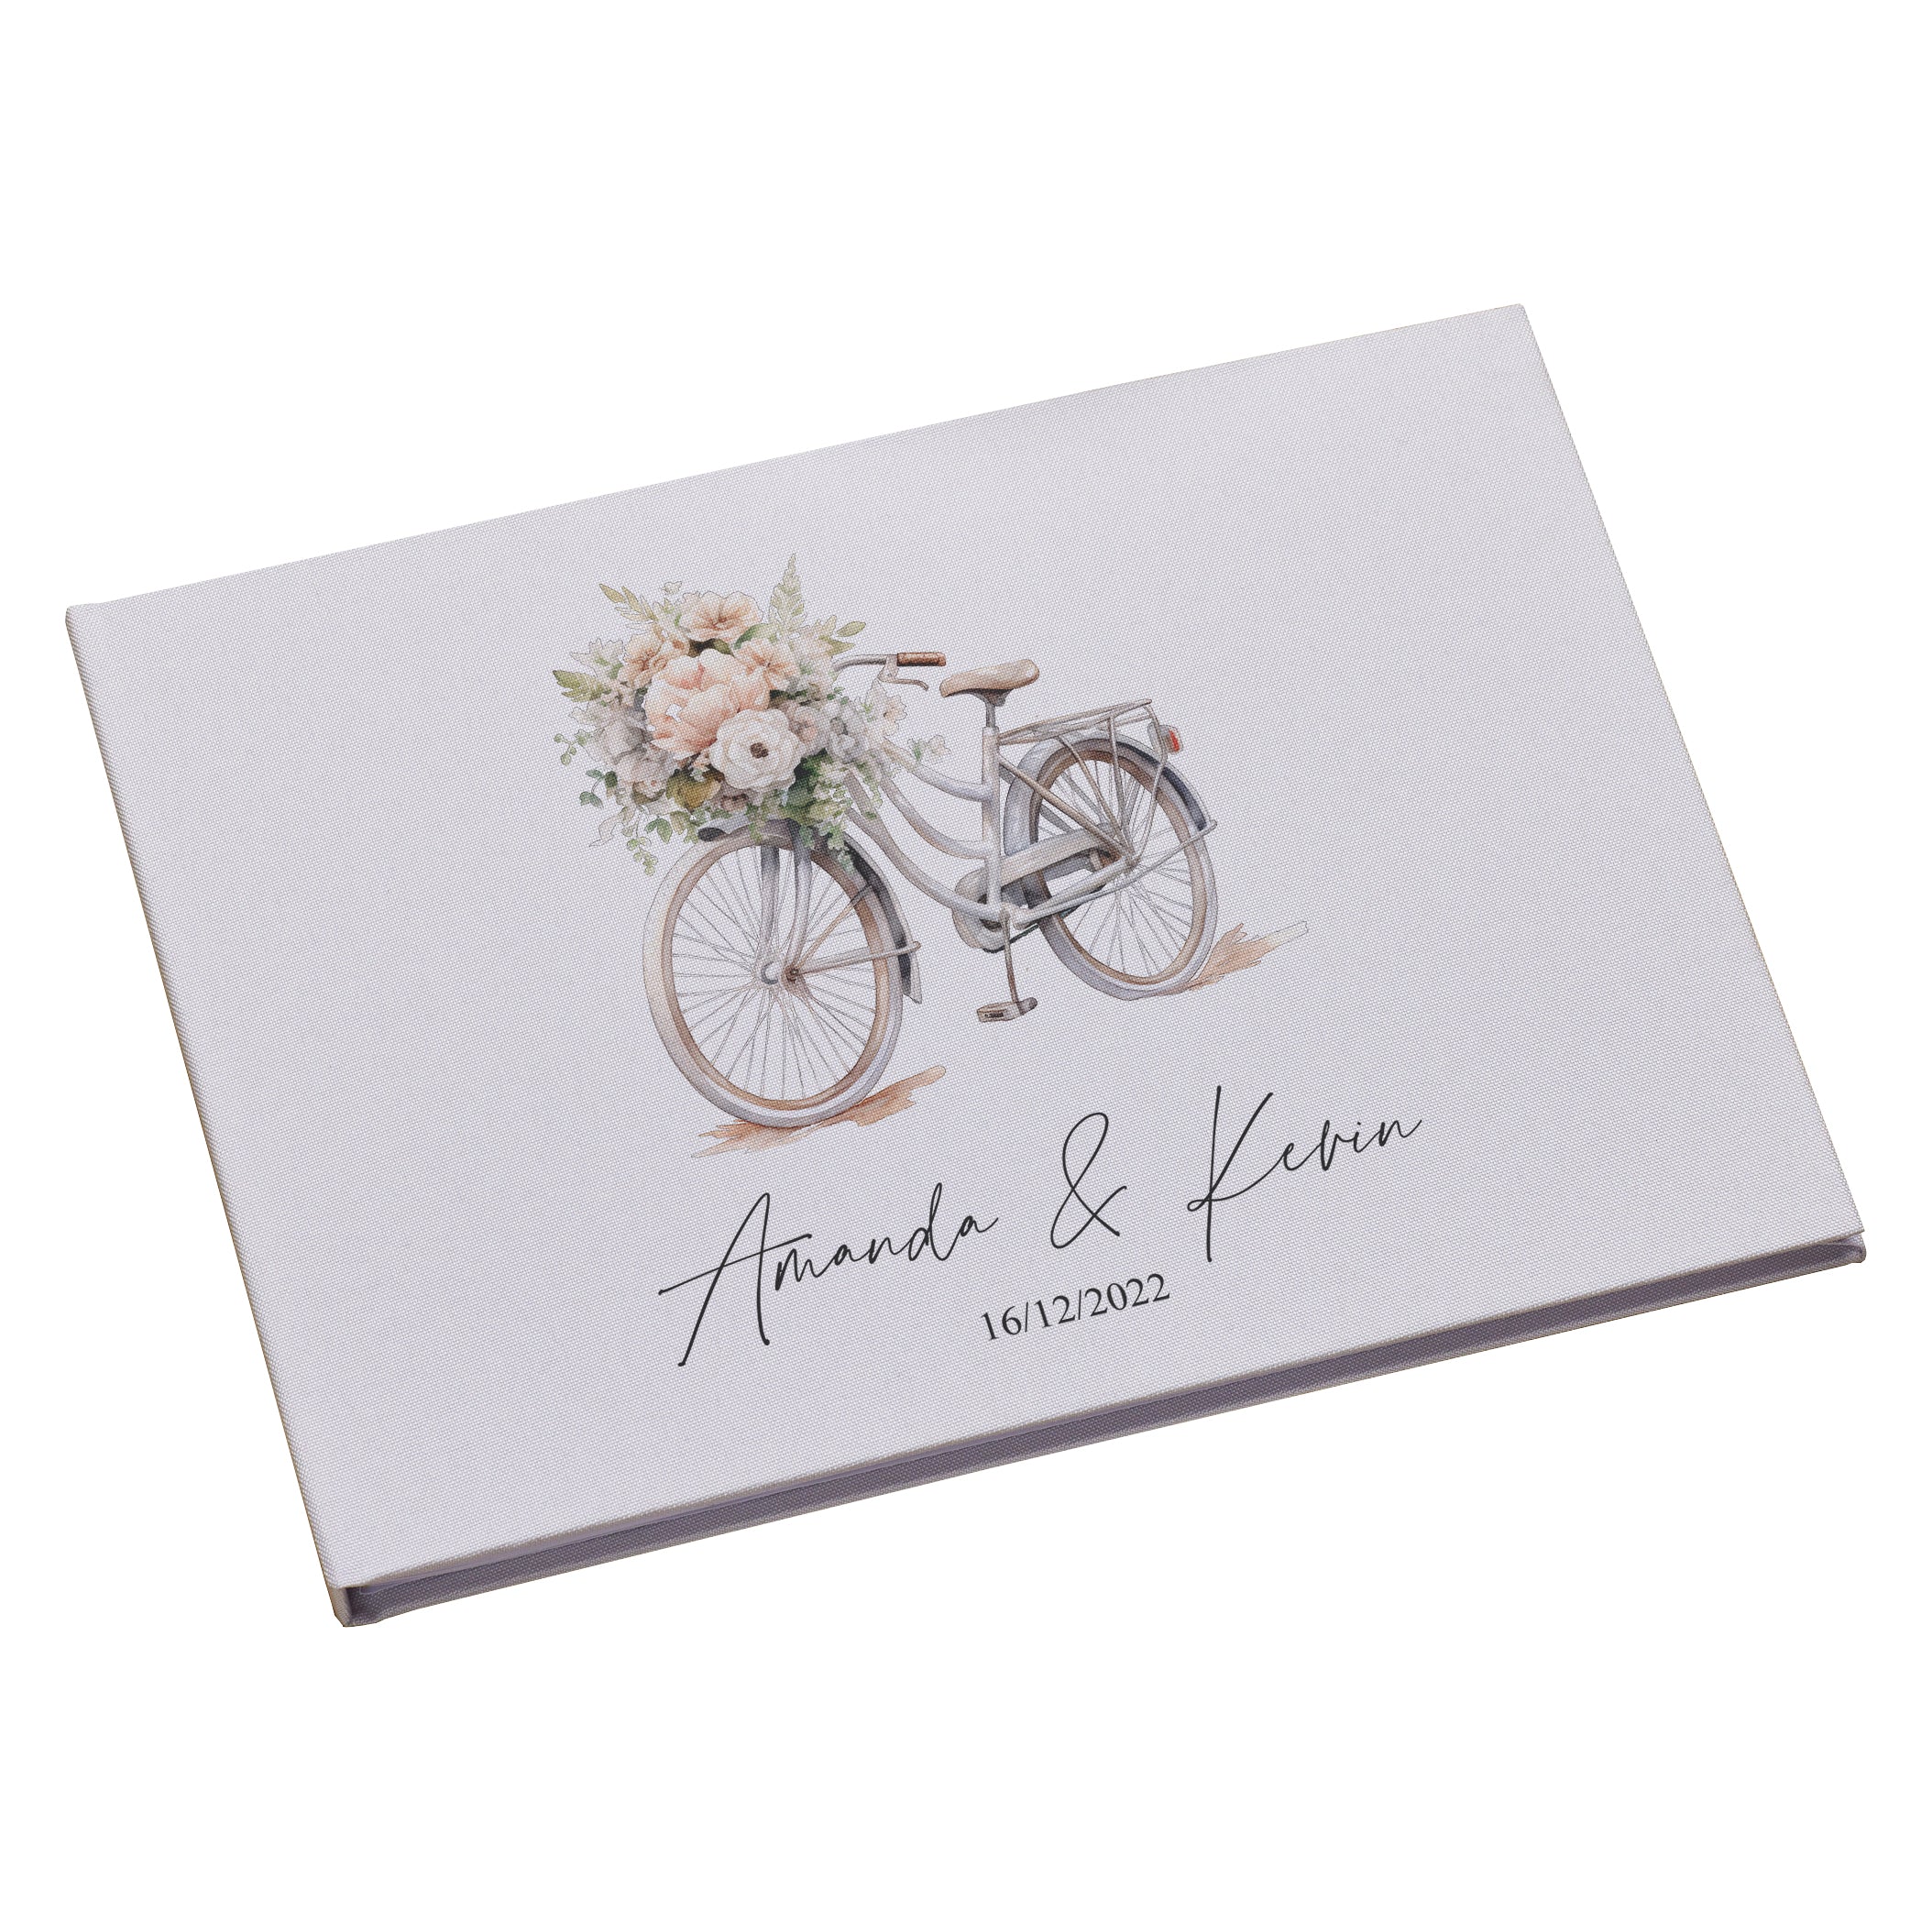 Large Personalised Wedding Guest Book Linen Cover With Floral Bike Design